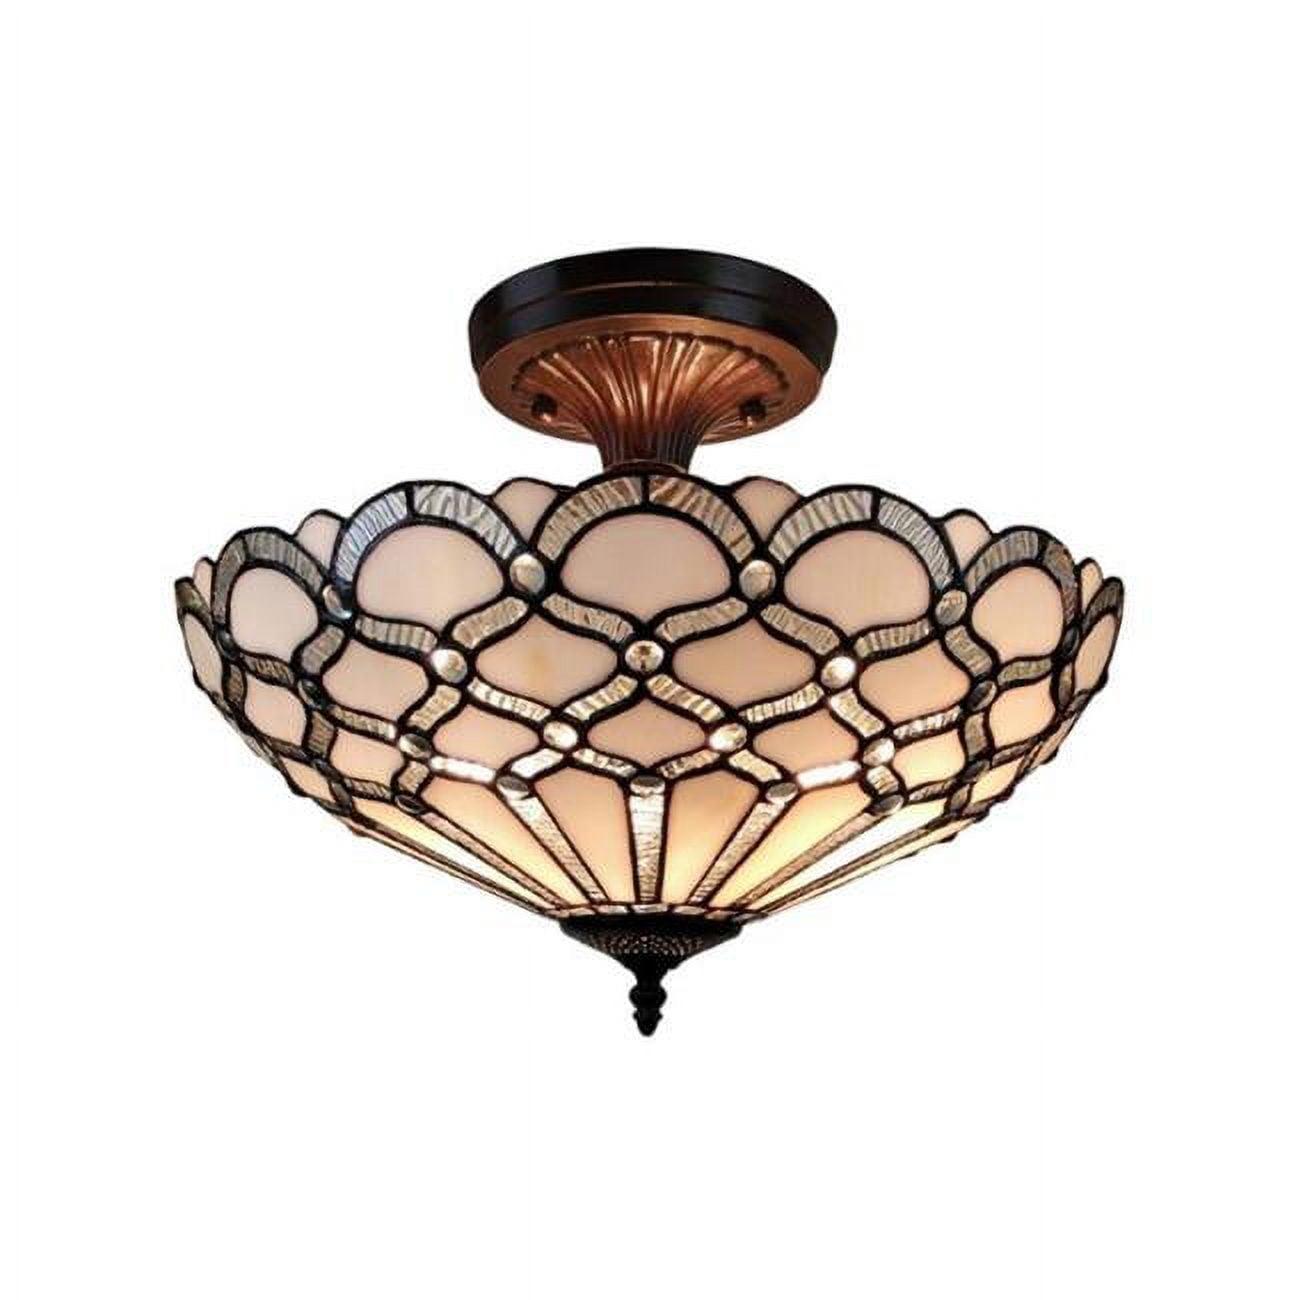 Amora 17" Wide Classic Tiffany-Style Ceiling Fixture with Stained Glass